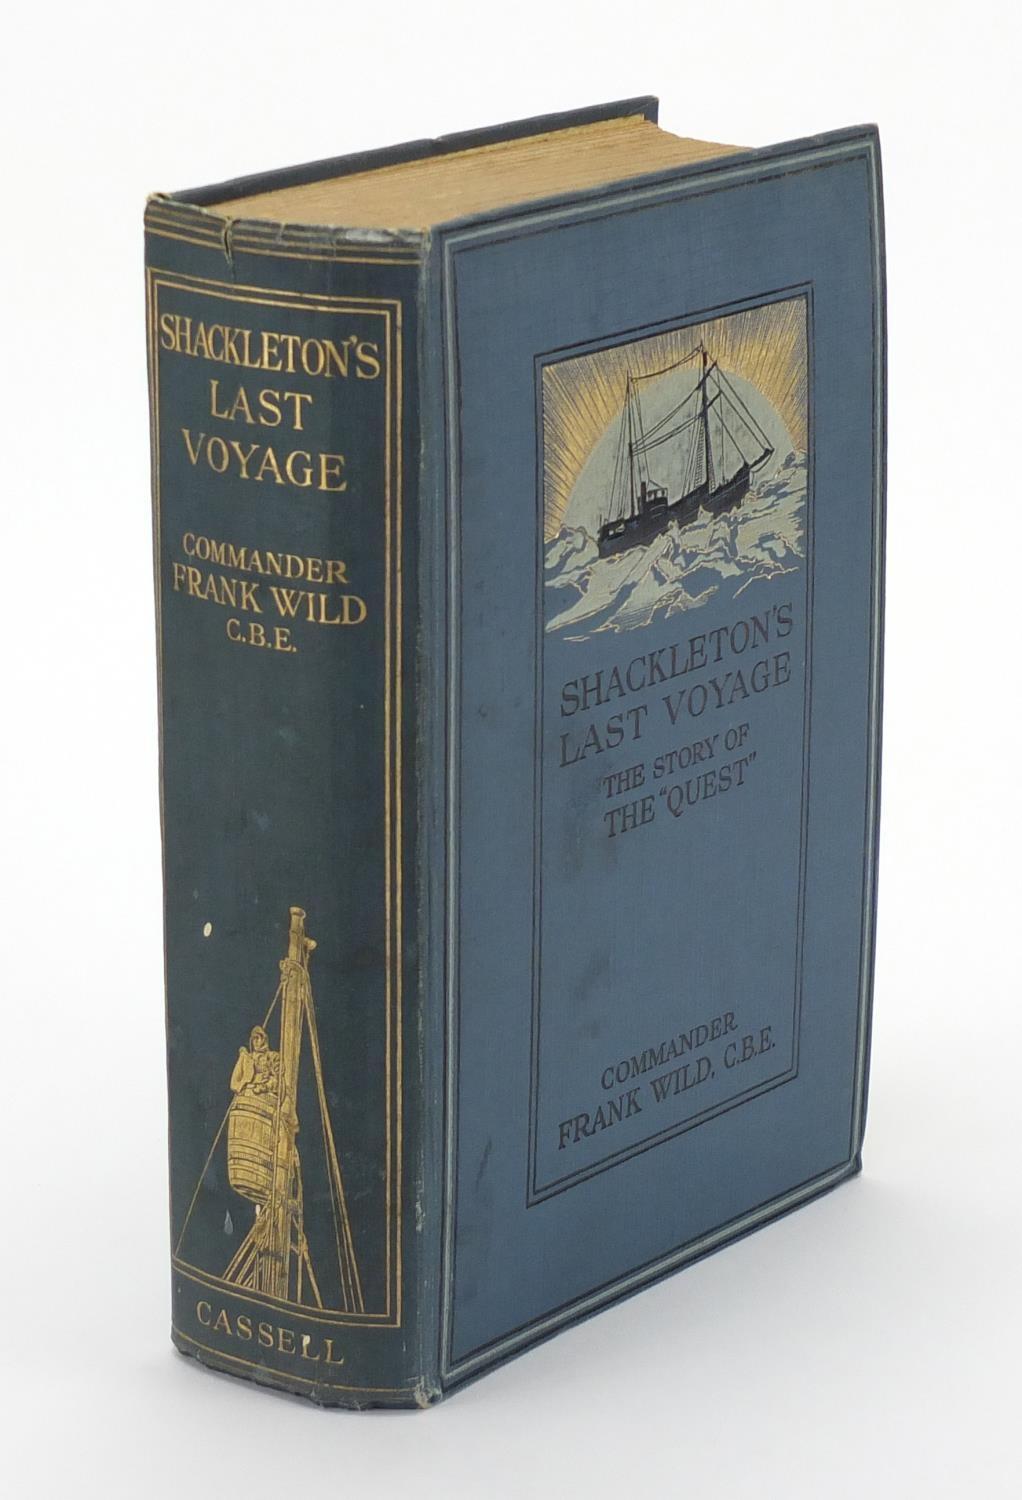 Shackleton's Last Voyage, The Story of the Crest, hardback book by Frank Wild published 1923 by